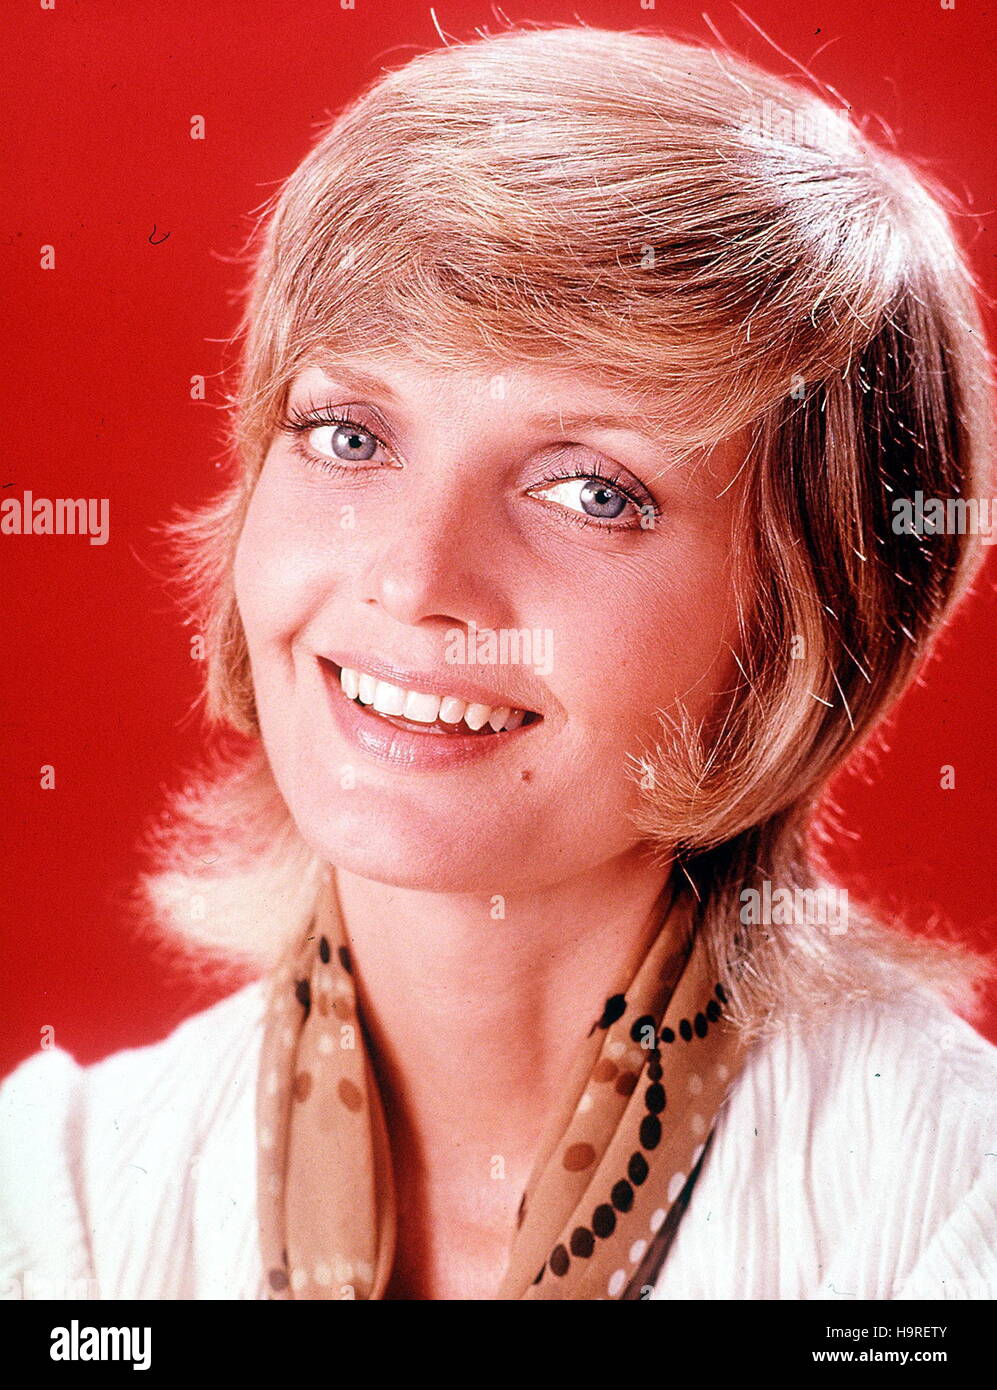 File. 24th Nov, 2016. FLORENCE AGNES HENDERSON (February 14, 1934 - November 24, 2016) was an American actress and singer with a career spanning six decades. She is best remembered for her starring role as matriarch Carol Brady on the ABC sitcom The Brady Bunch from 1969 to 1974. Henderson also appeared in film as well as on stage and hosted several long-running cooking and variety shows over the years. She was a contestant on Dancing with the Stars in 2010. Pictured ''Brady Bunch''. Florence Henderson. 1970's © ABC/Entertainment Pictures/ZUMAPRESS.com/Alamy Live News Stock Photo